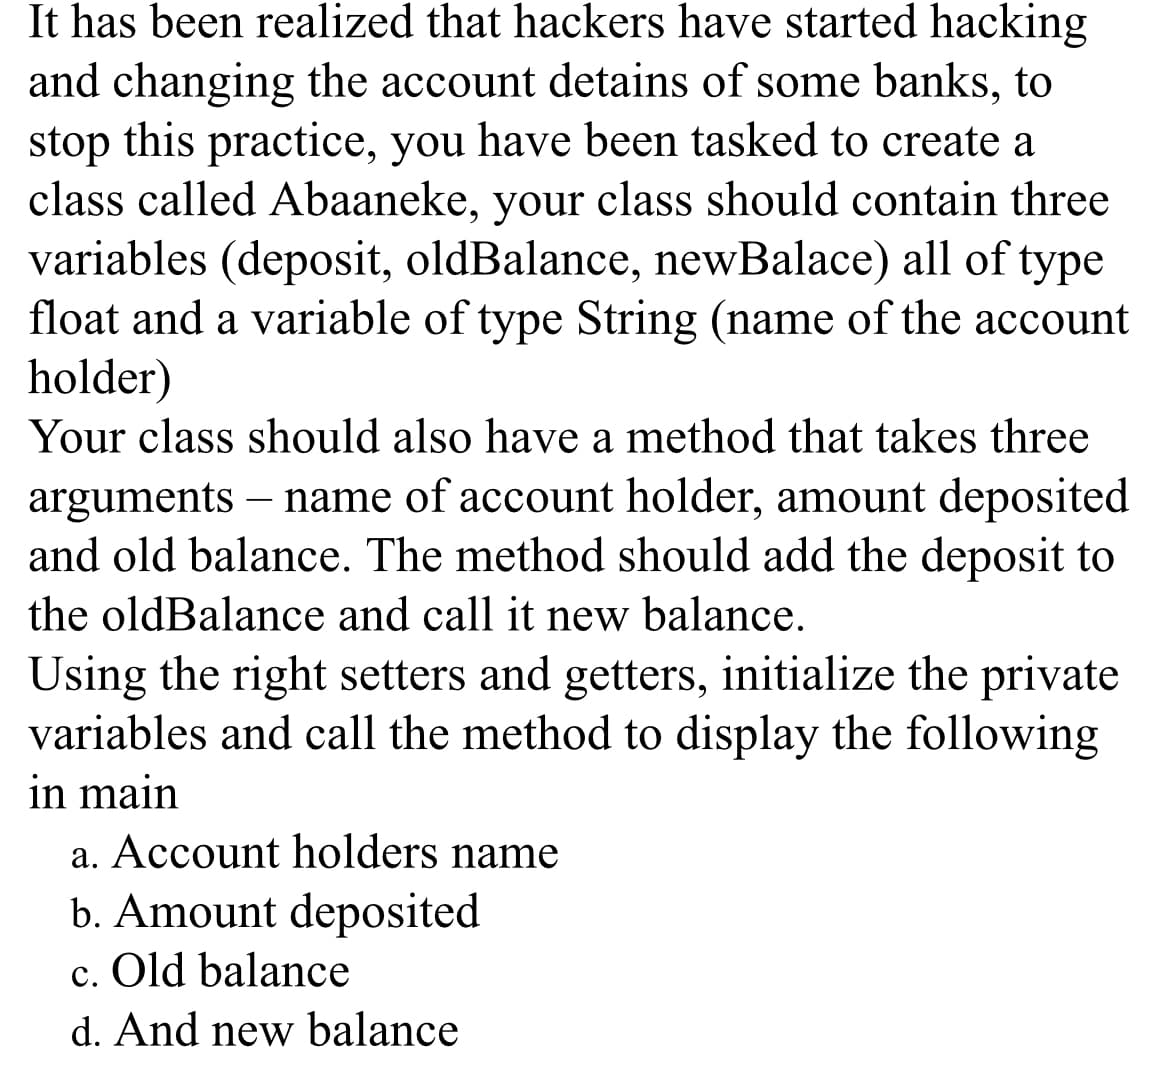 It has been realized that hackers have started hacking
and changing the account detains of some banks, to
stop this practice, you have been tasked to create a
class called Abaaneke, your class should contain three
variables (deposit, oldBalance, newBalace) all of type
float and a variable of type String (name of the account
holder)
Your class should also have a method that takes three
arguments – name of account holder, amount deposited
and old balance. The method should add the deposit to
the oldBalance and call it new balance.
Using the right setters and getters, initialize the private
variables and call the method to display the following
in main
a. Account holders name
b. Amount deposited
c. Old balance
d. And new balance
